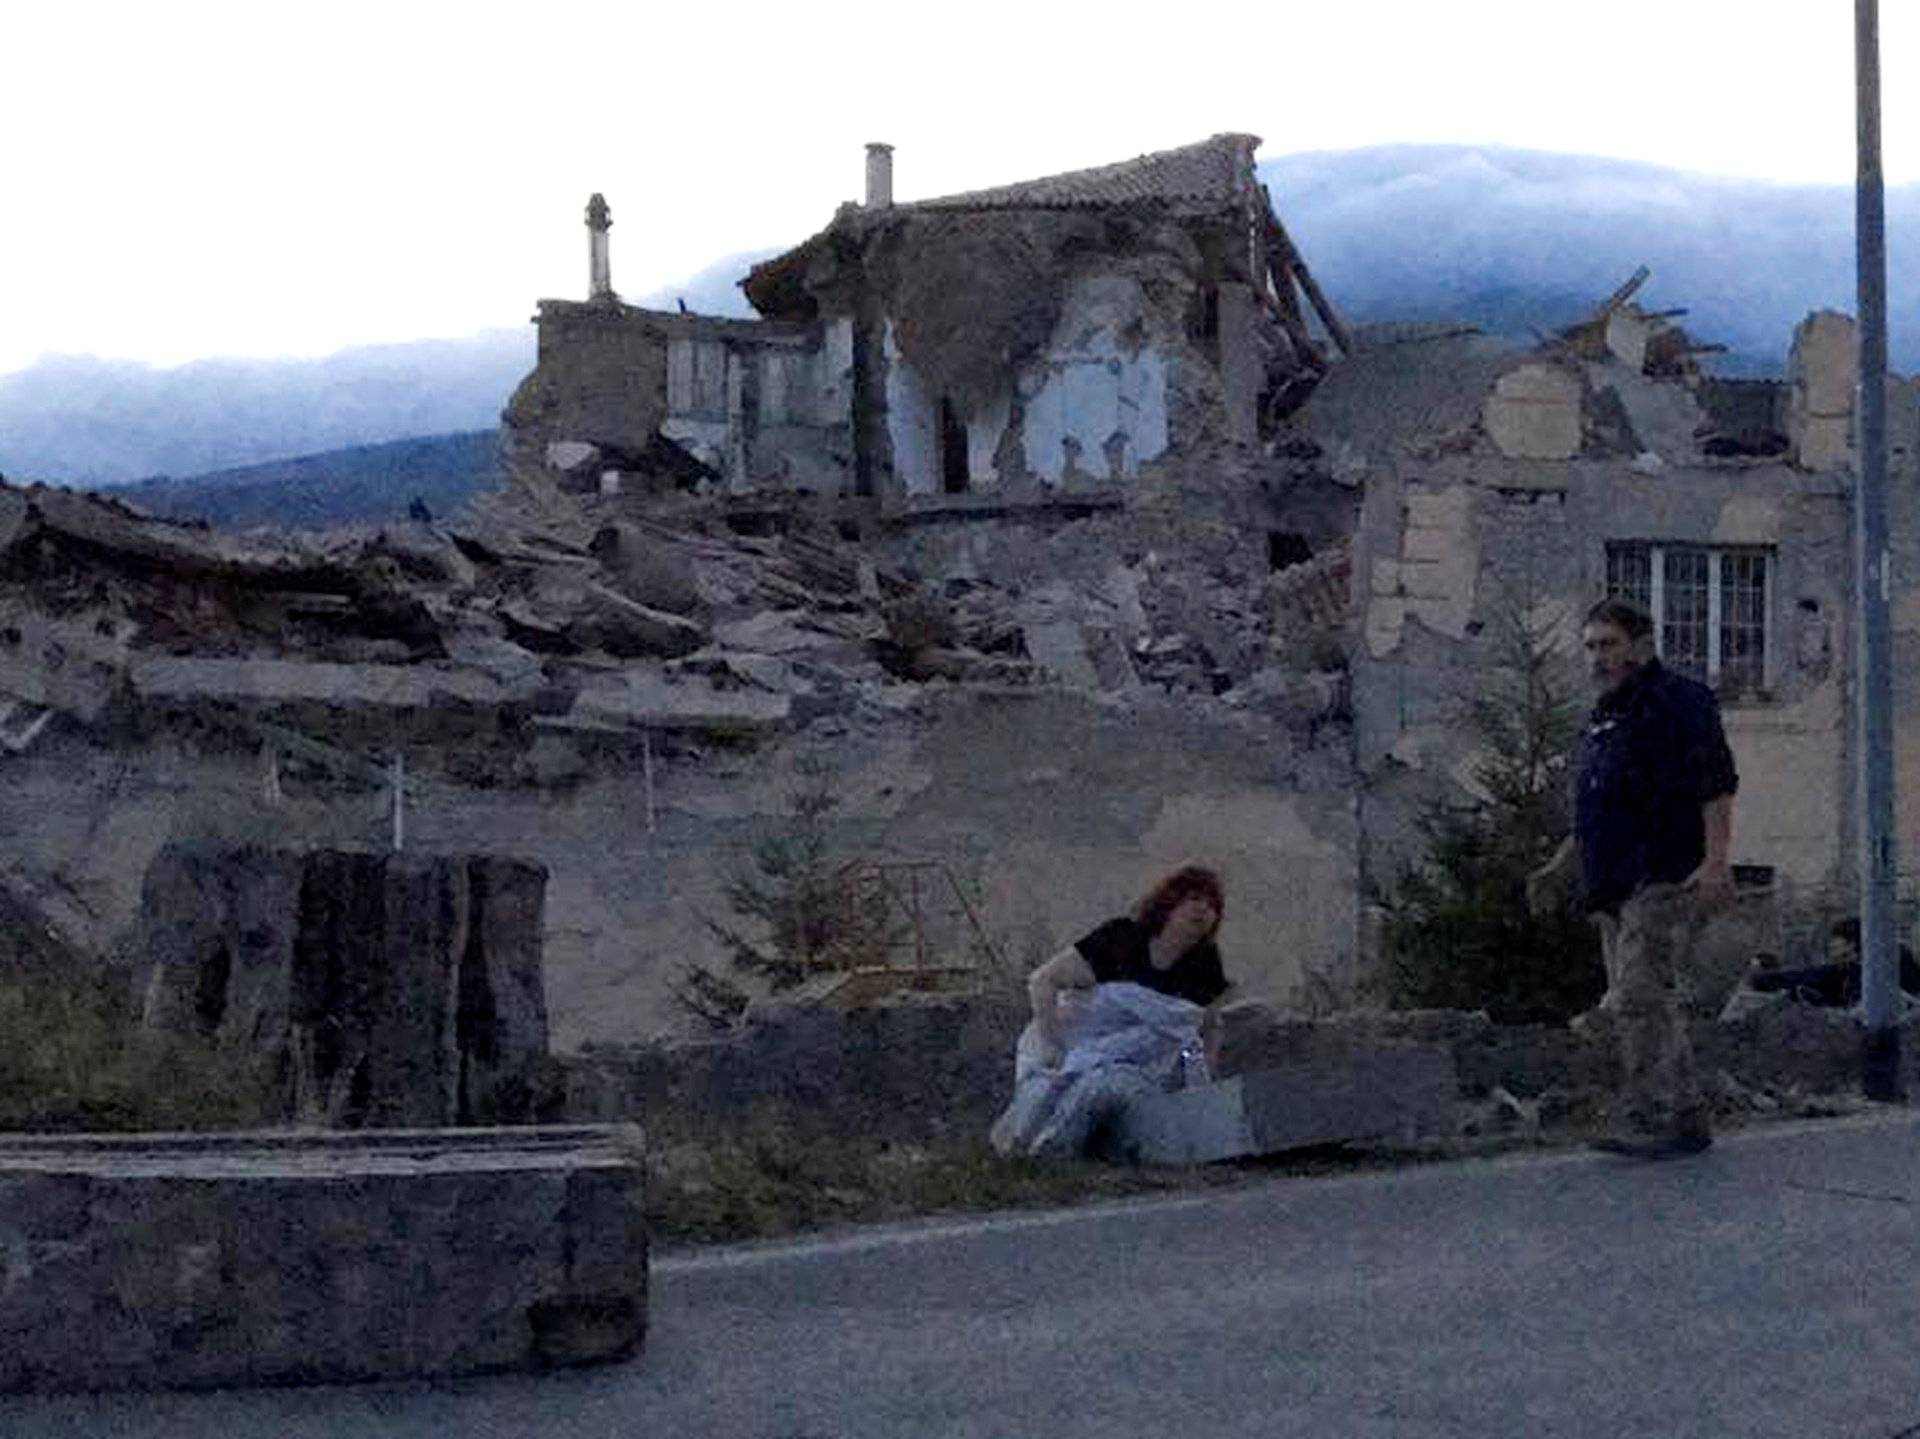 People stand by a road following a quake in Amatrice 